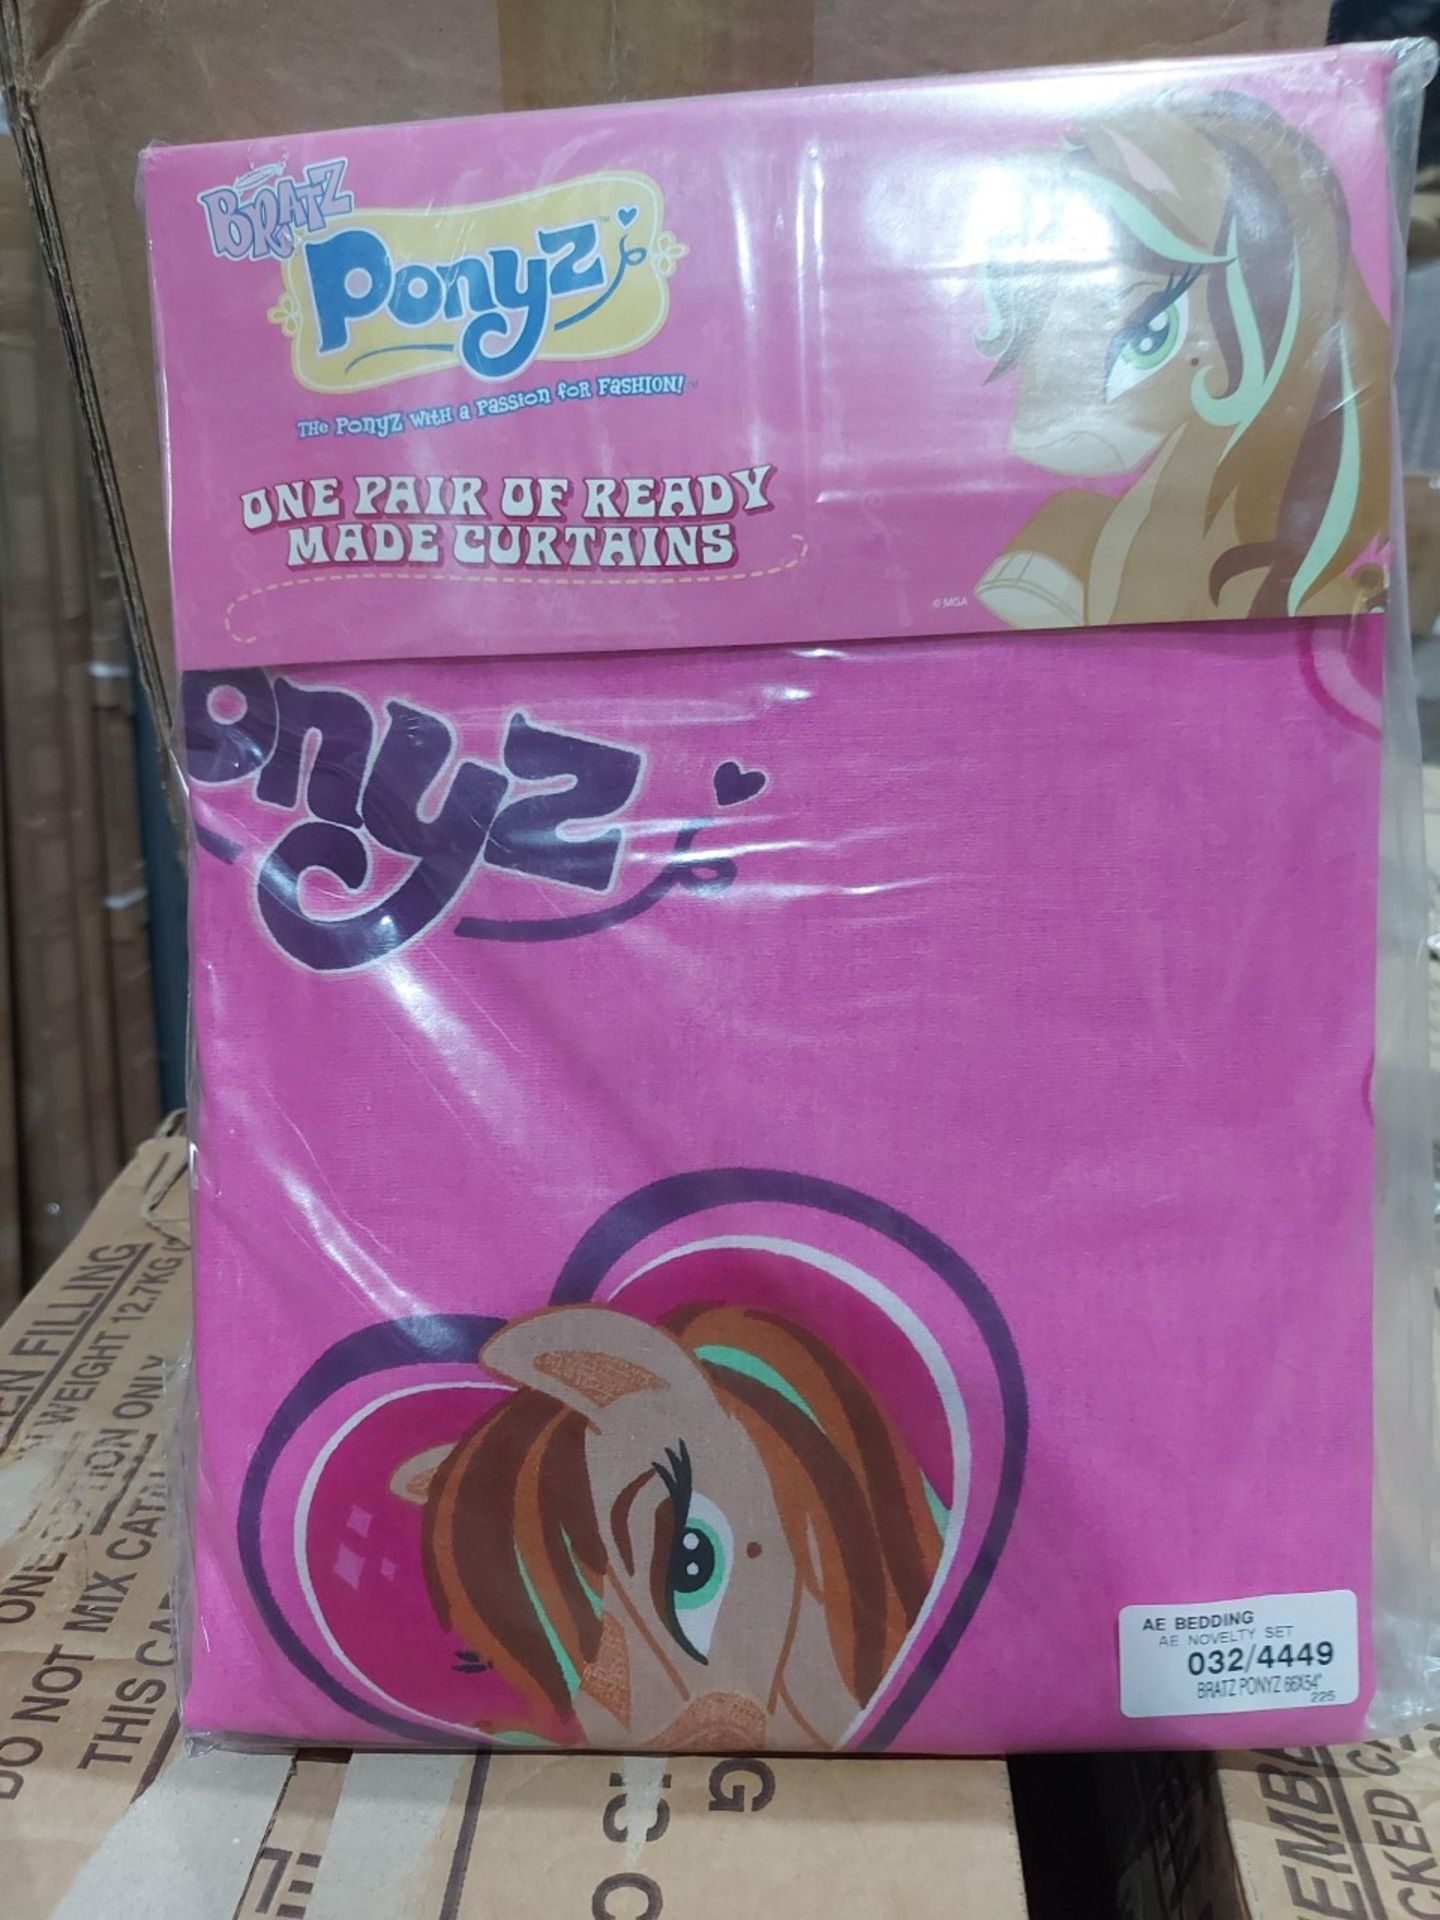 (K91) PALLET TO CONTAIN 130 x NEW PACKAGED BRATZ PONYZ PAIRS OF READY MADE CURTAINS. RRP £20 PER